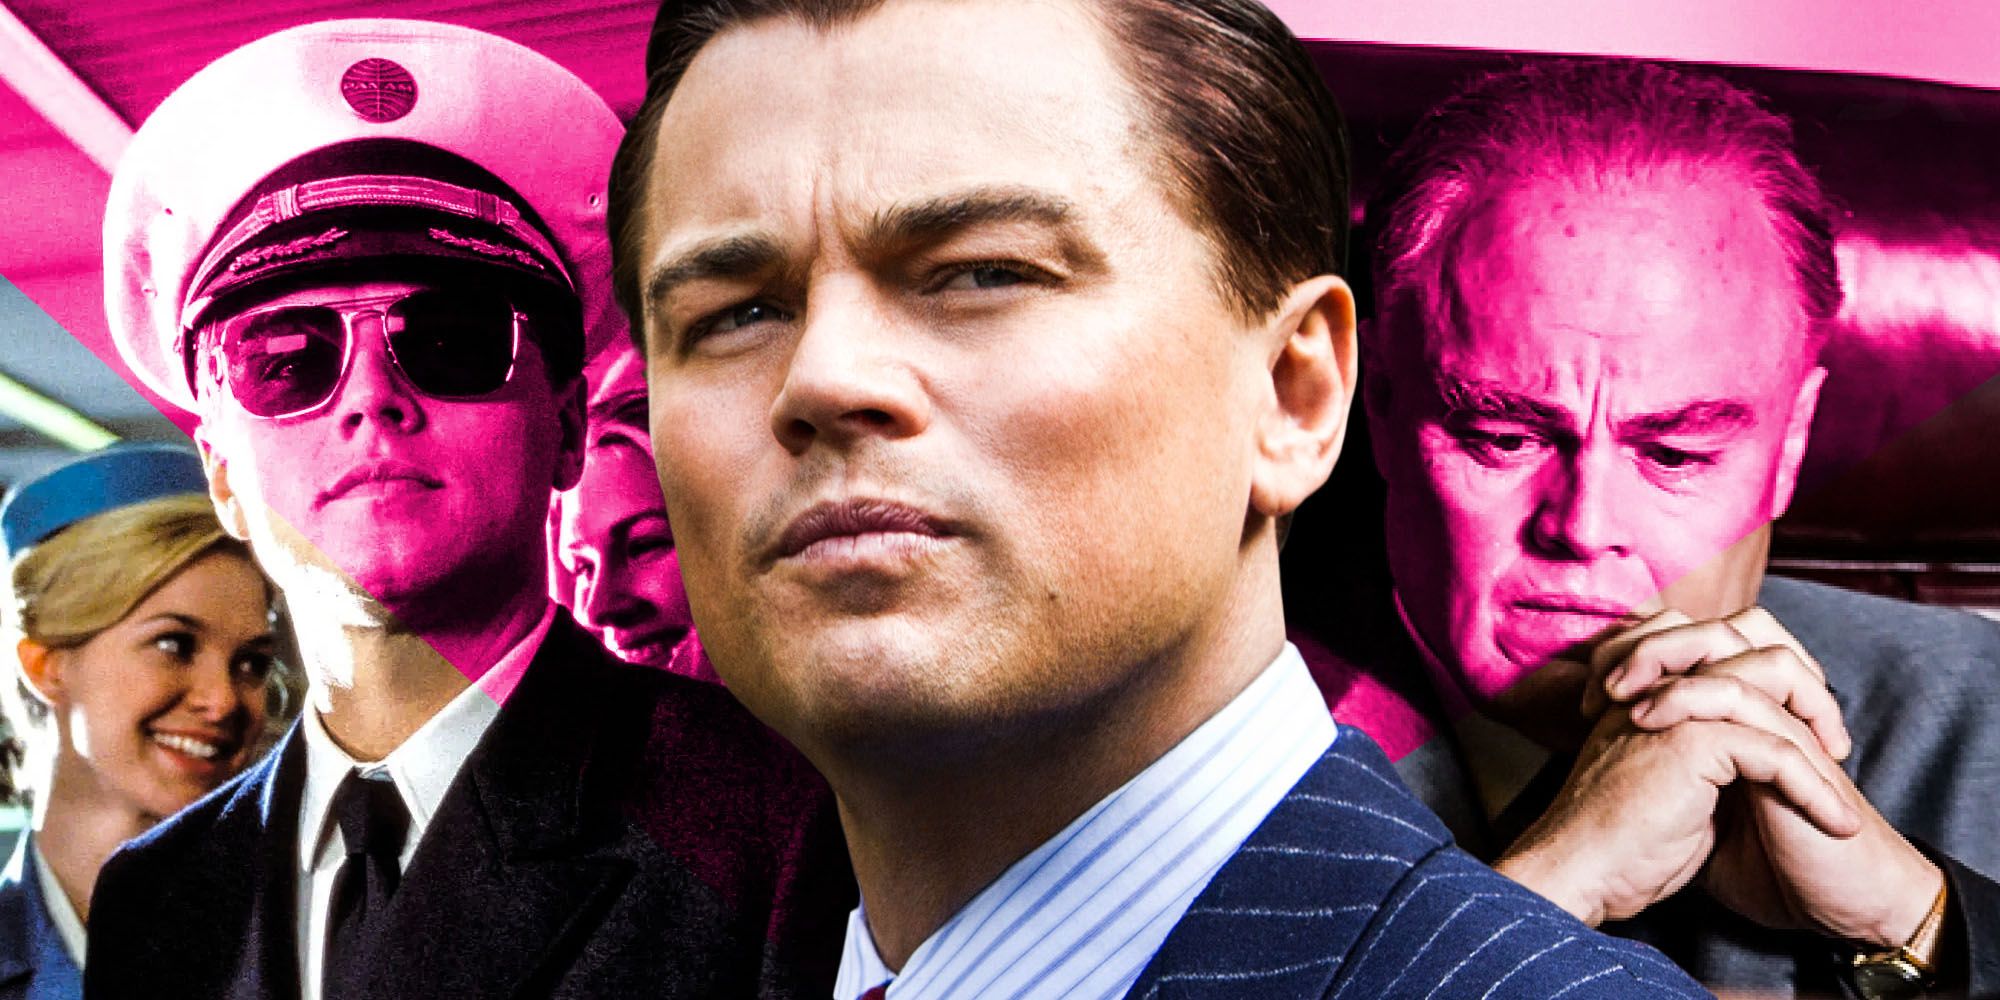 Leonardo dicaprio real life figures played jordan belfort wolf of wall street j edgar hoover catch me if you can frank abignale